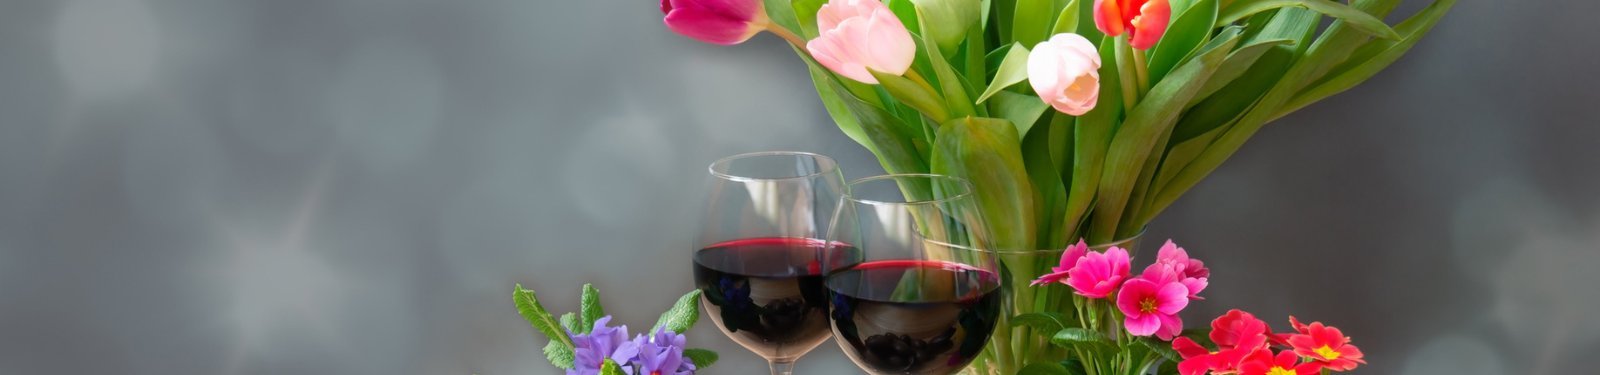 Easter Wines - The Spanish Table